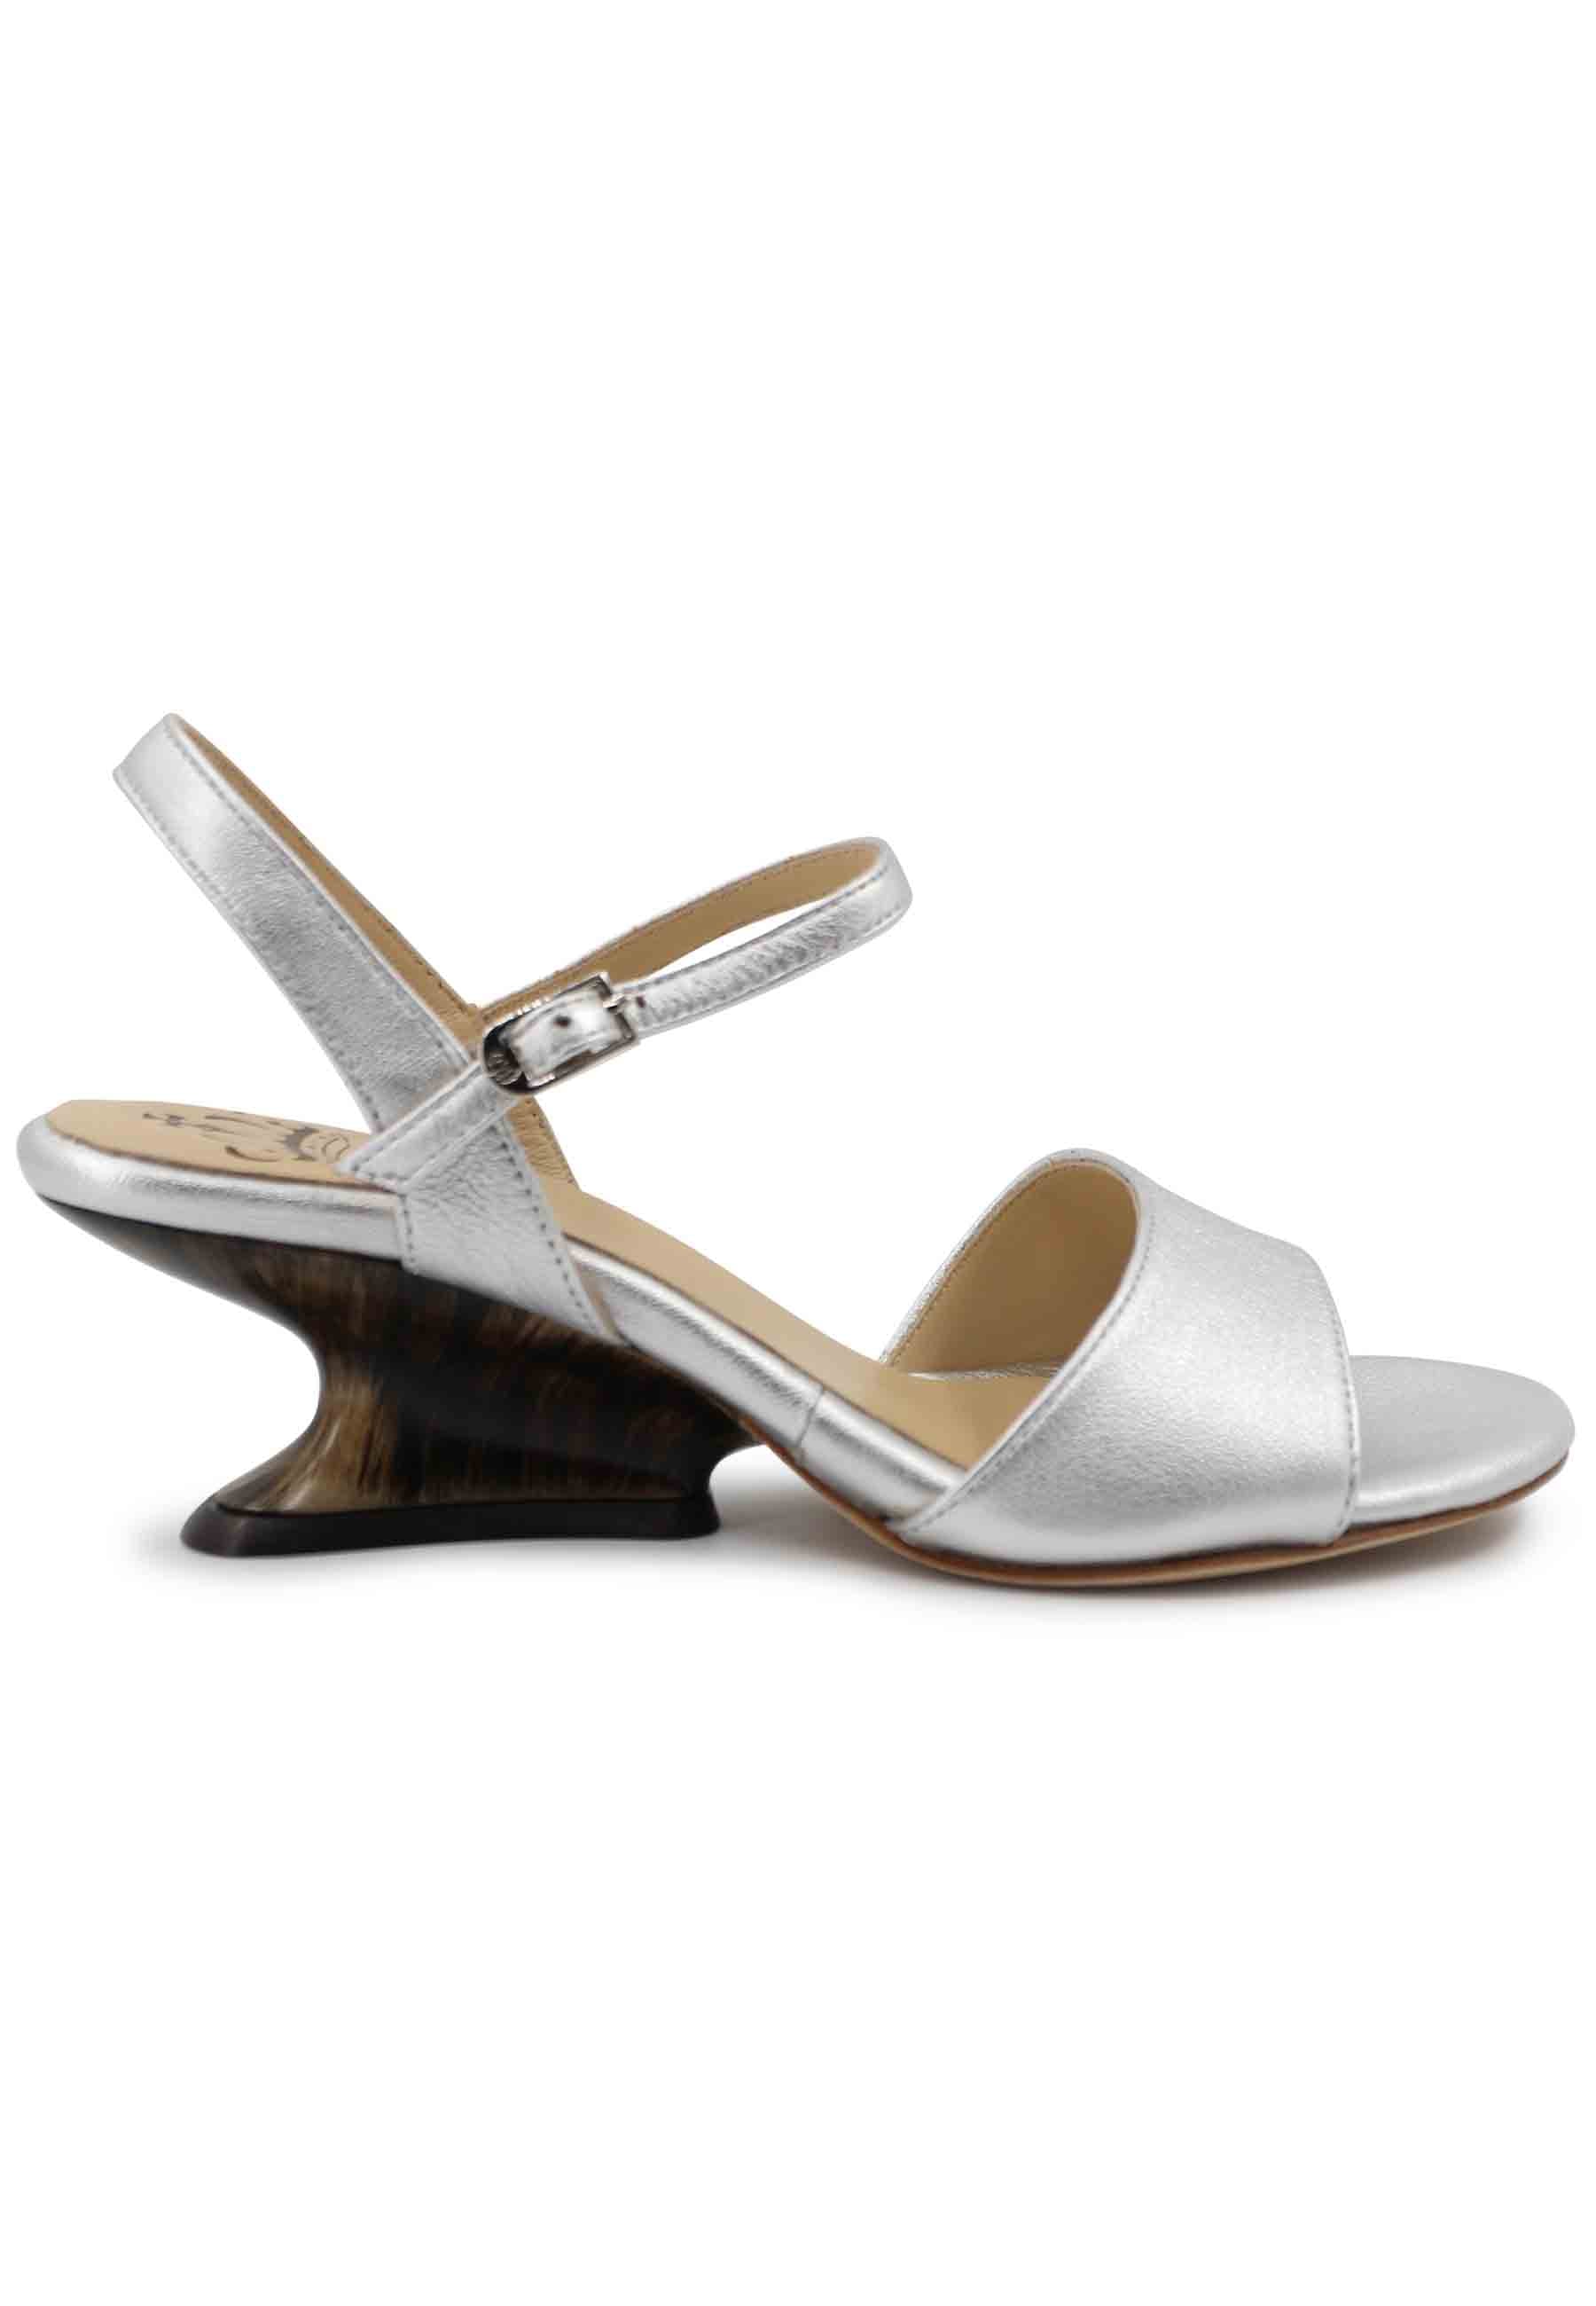 Women's sandals in silver laminated leather with low wedge